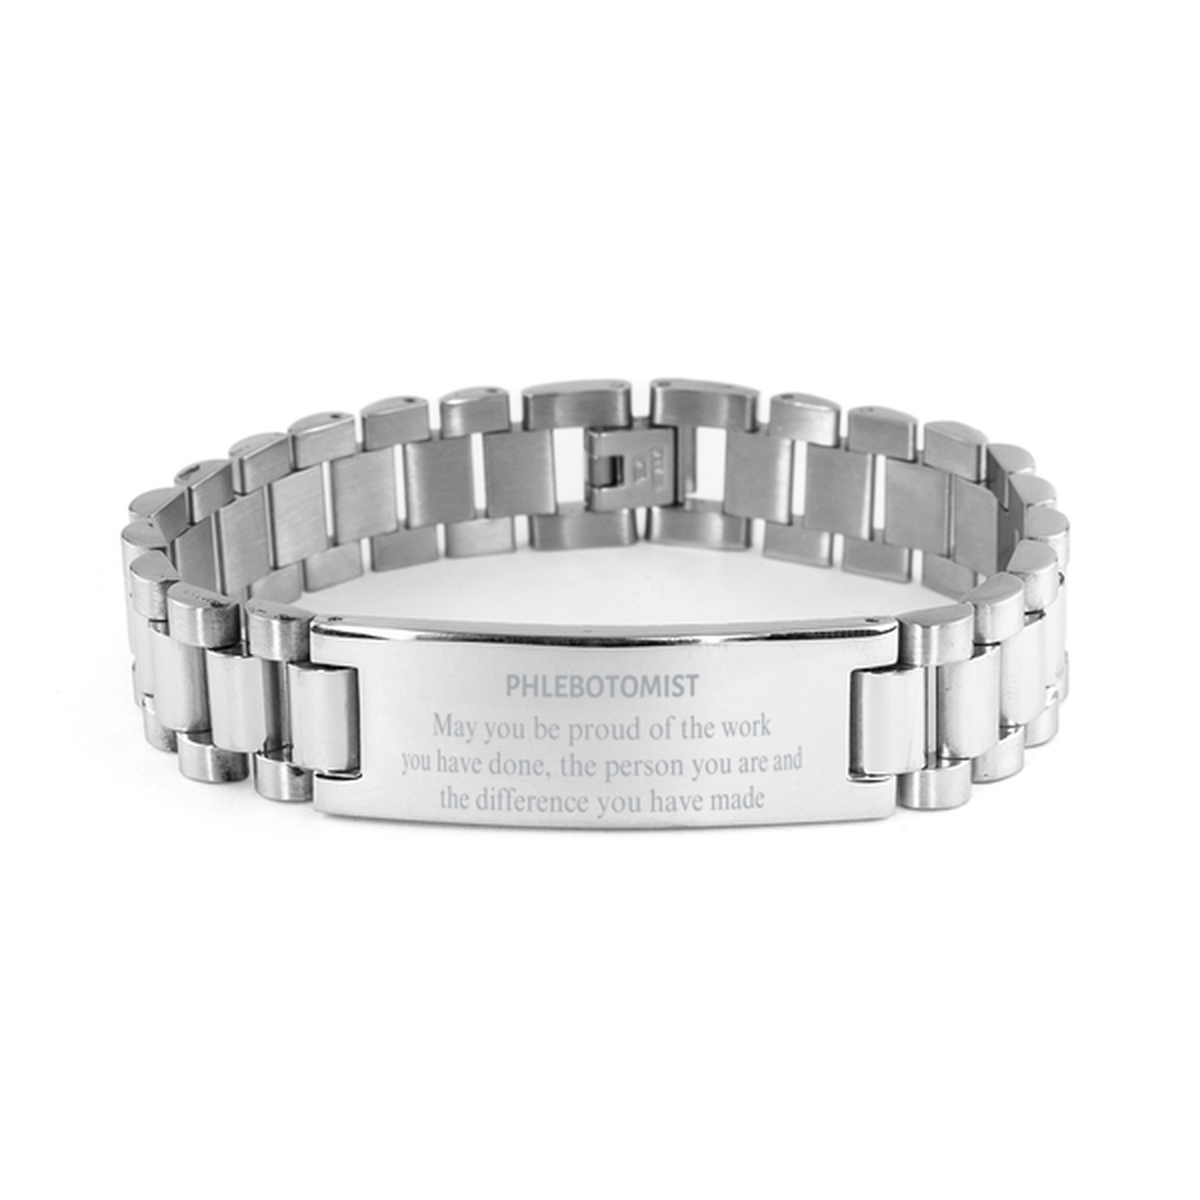 Phlebotomist May you be proud of the work you have done, Retirement Phlebotomist Ladder Stainless Steel Bracelet for Colleague Appreciation Gifts Amazing for Phlebotomist